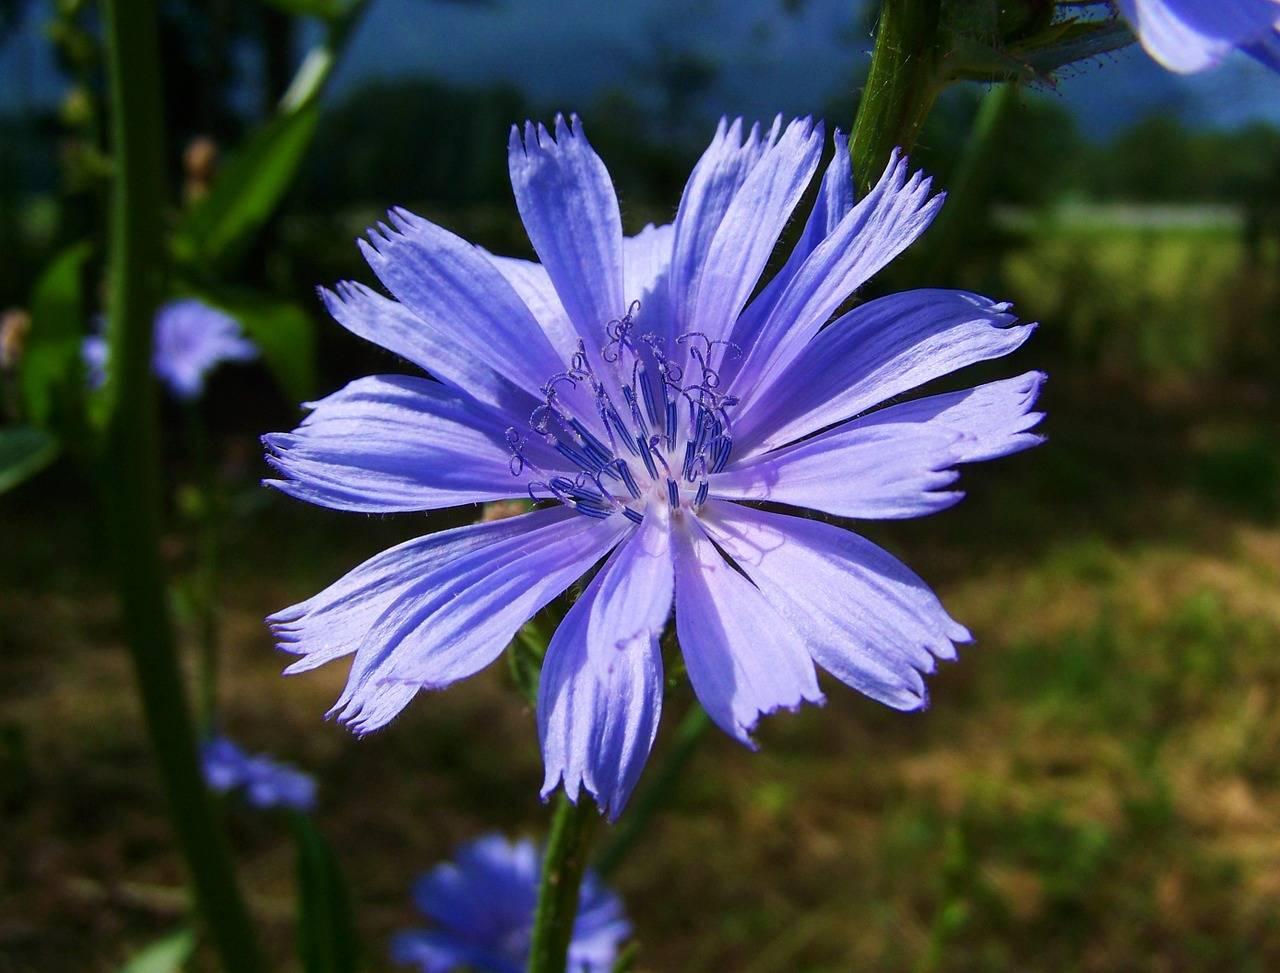 Chicory benefit and harm